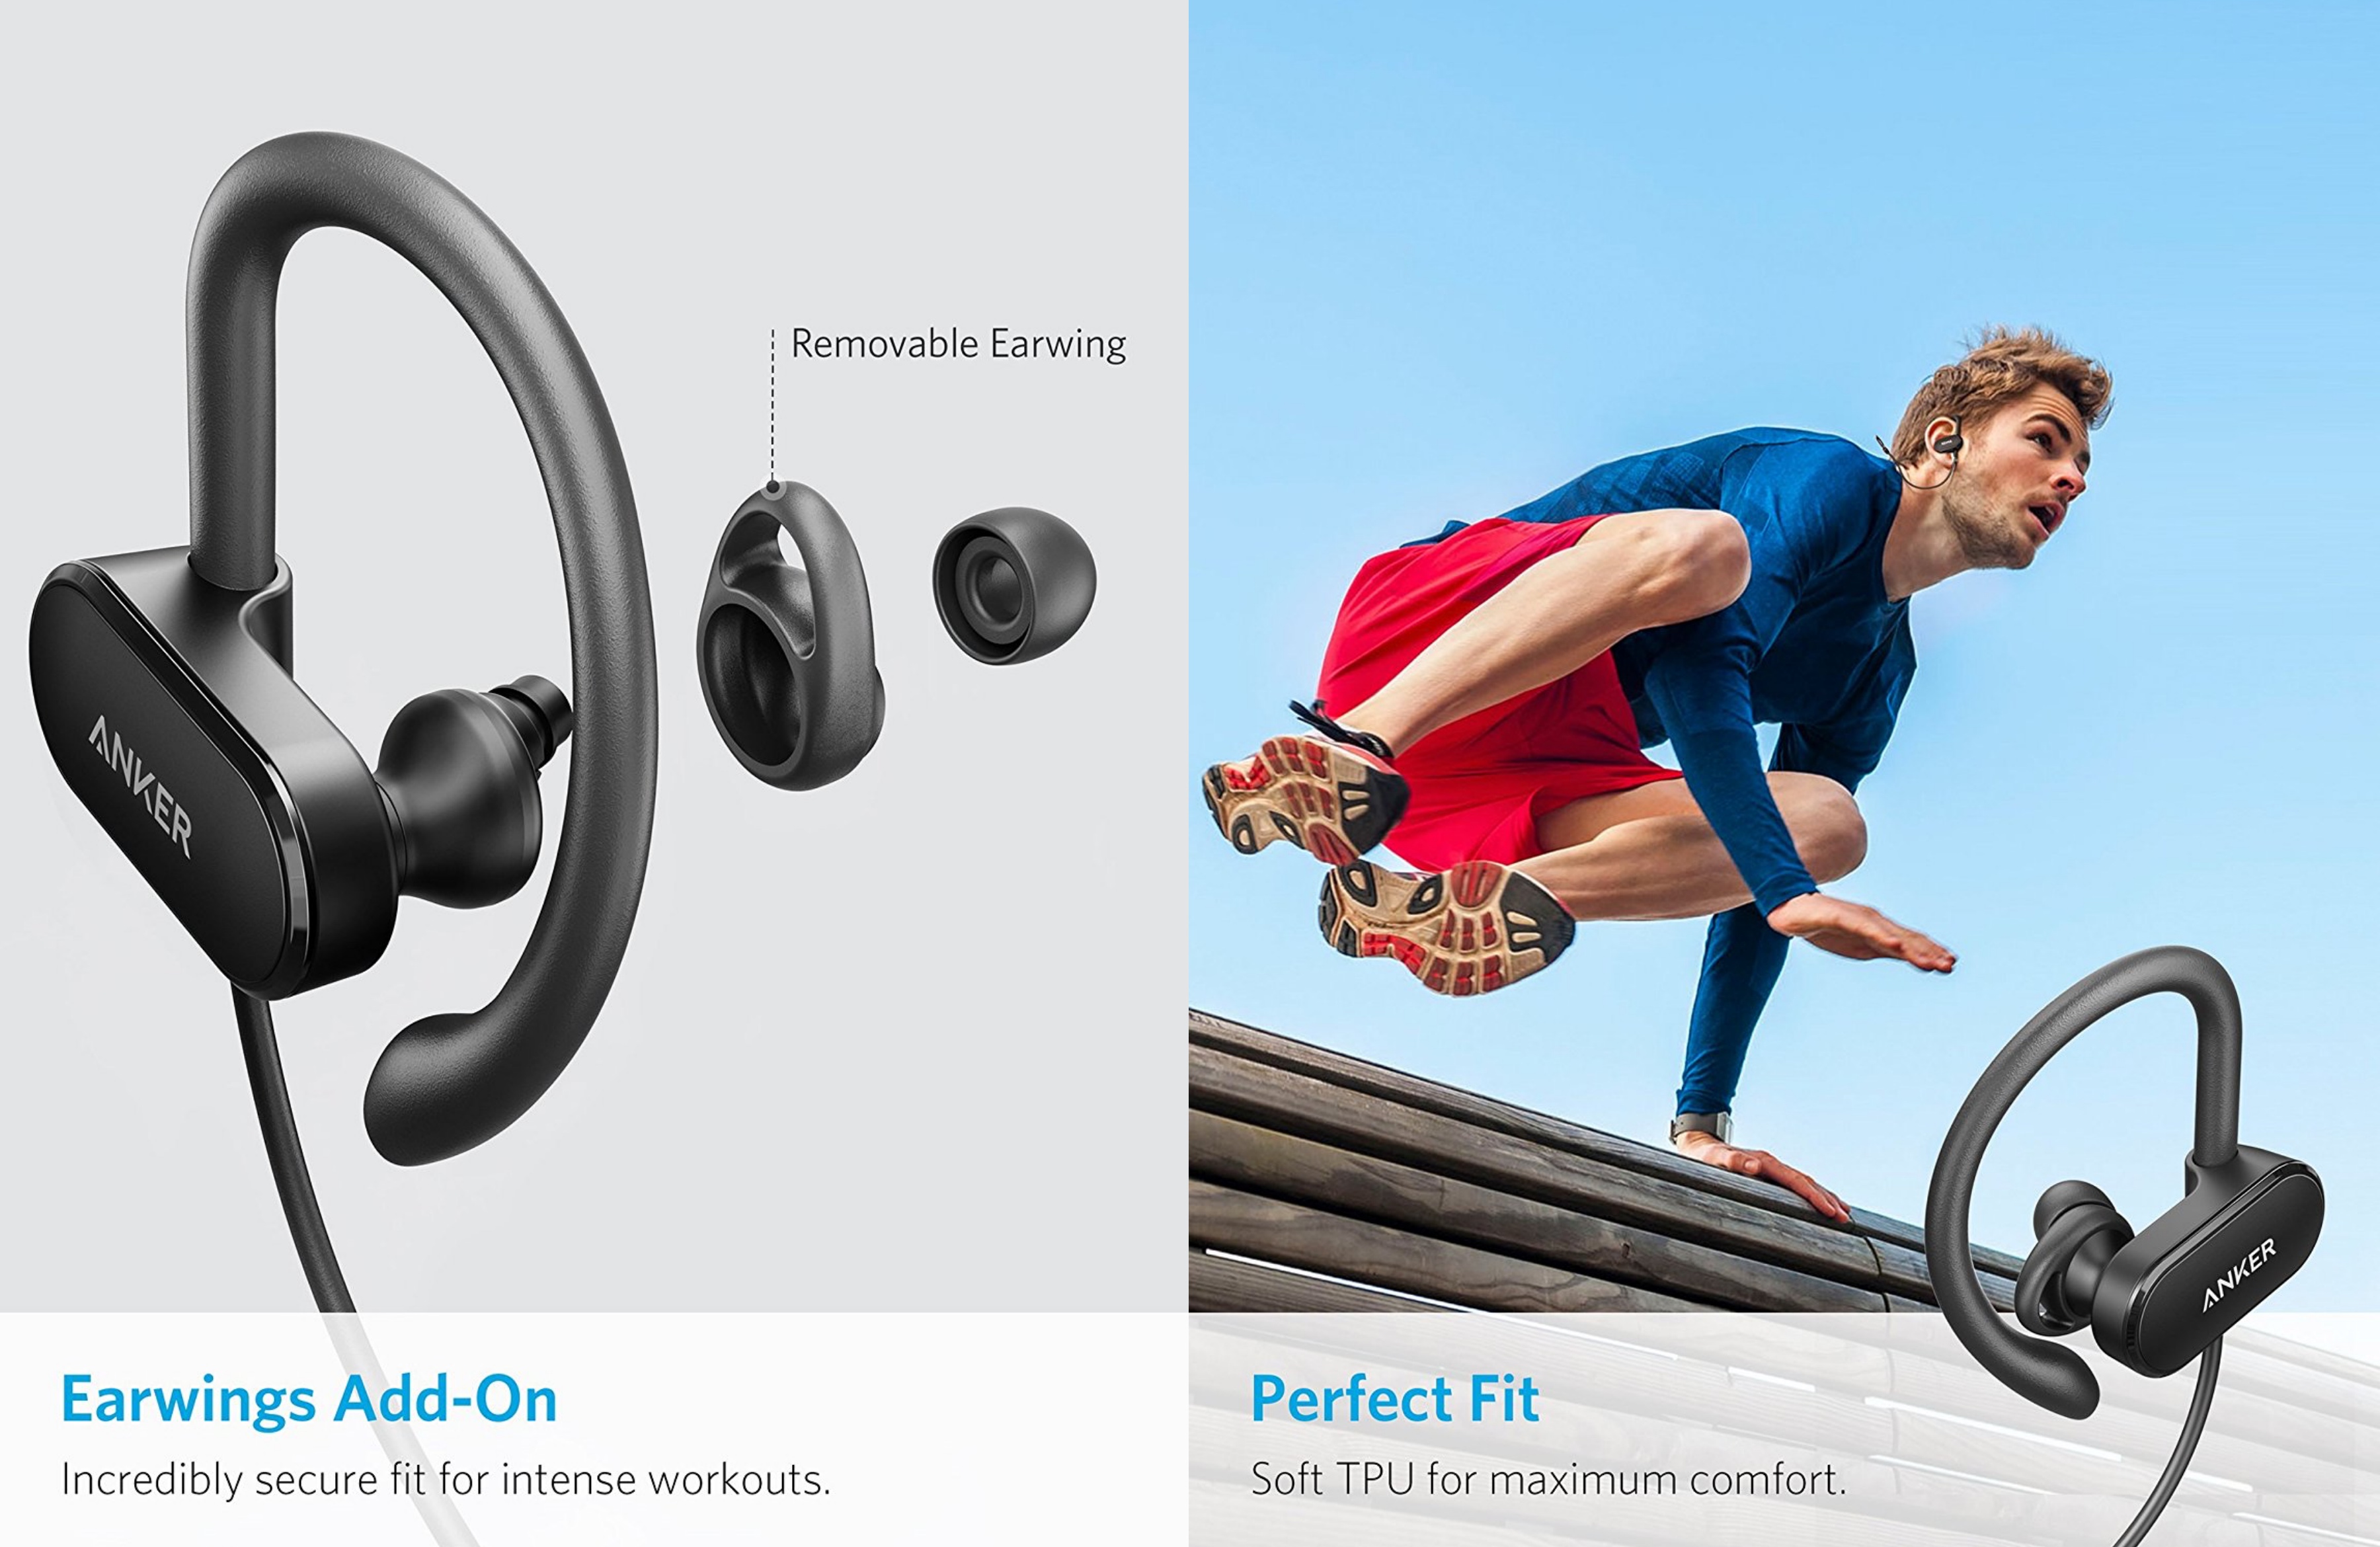 The Anker SoundBuds Curve Are The Newest And Best Gym Earbuds Around